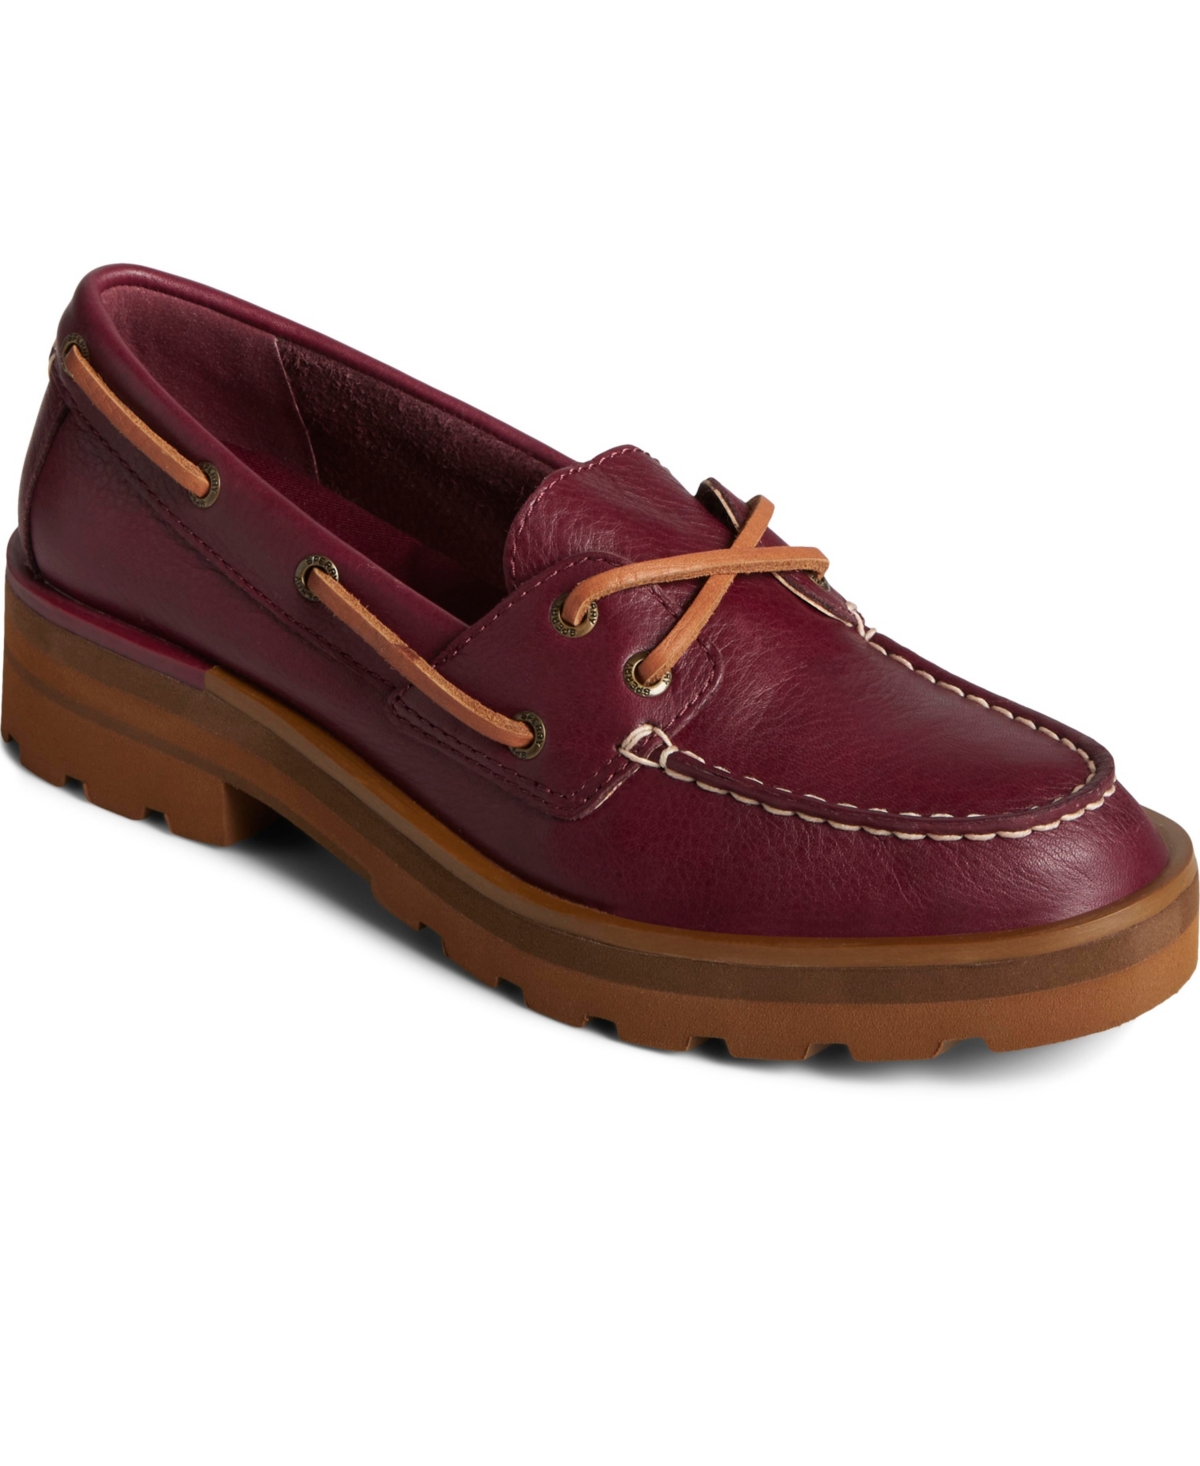 Chunky Faux Leather Boat Shoes - Cordovan